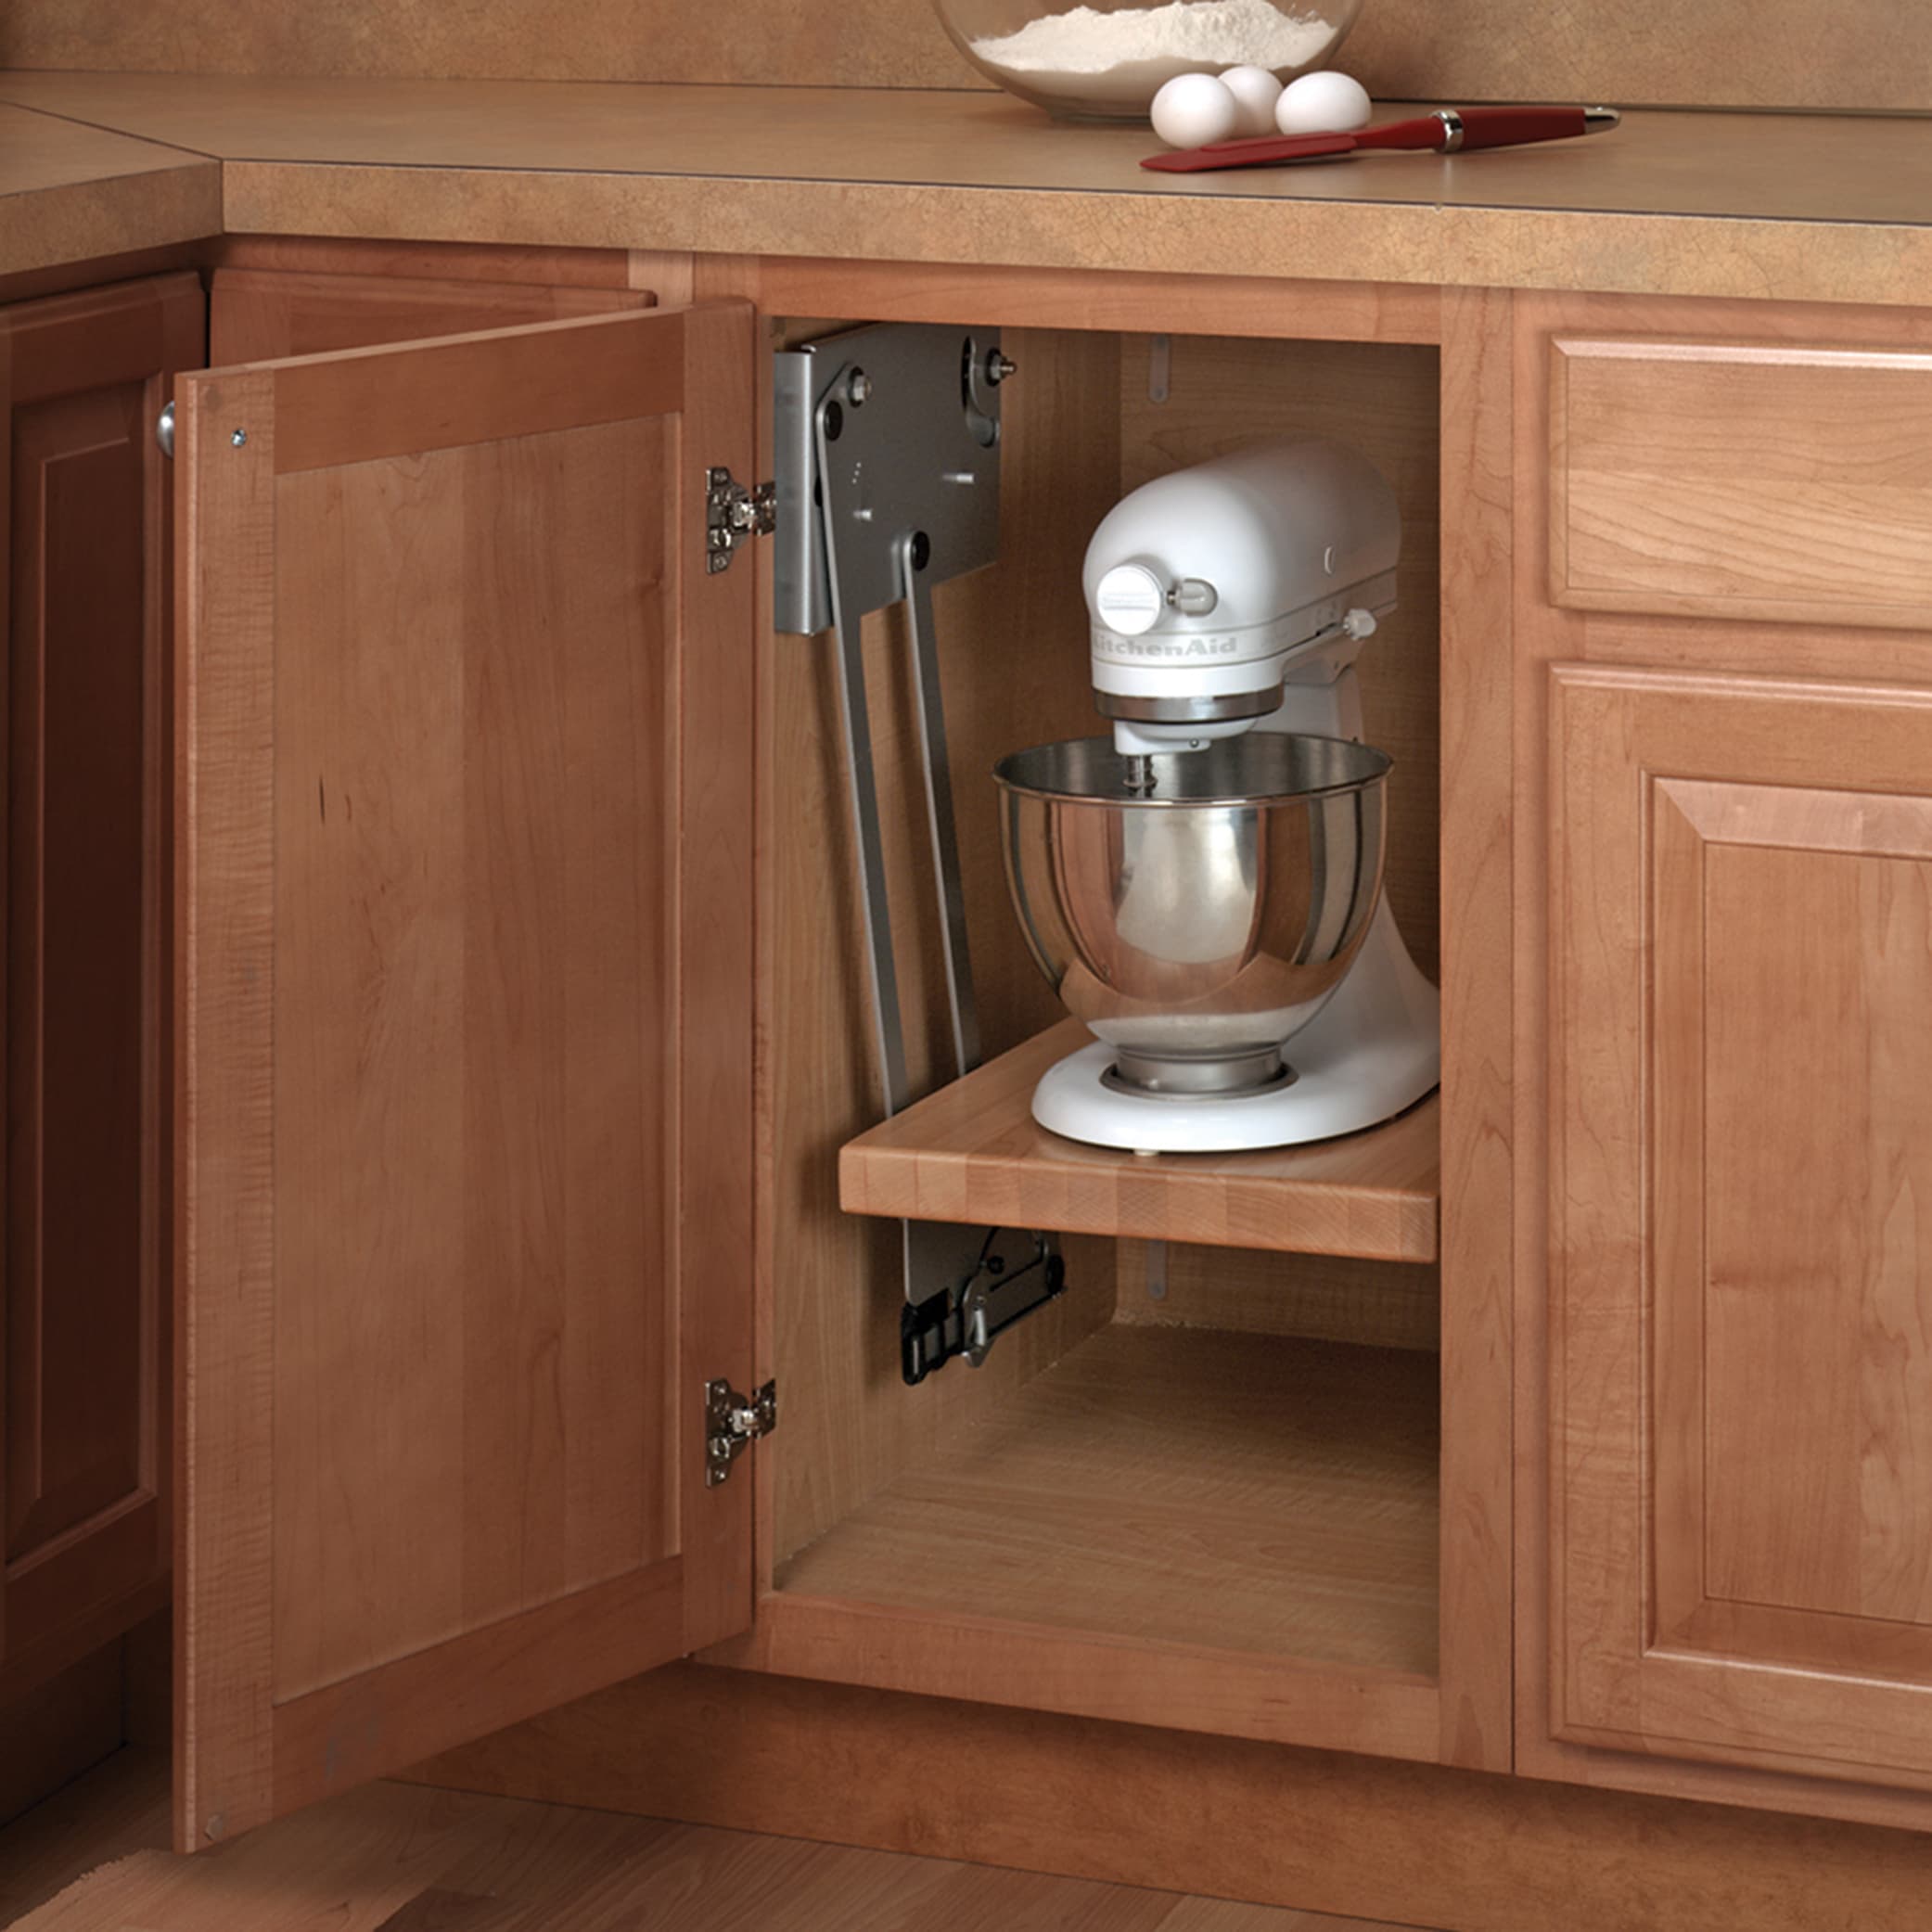 Pull Out KItchen Mixer Cabinet - Transitional - Kitchen